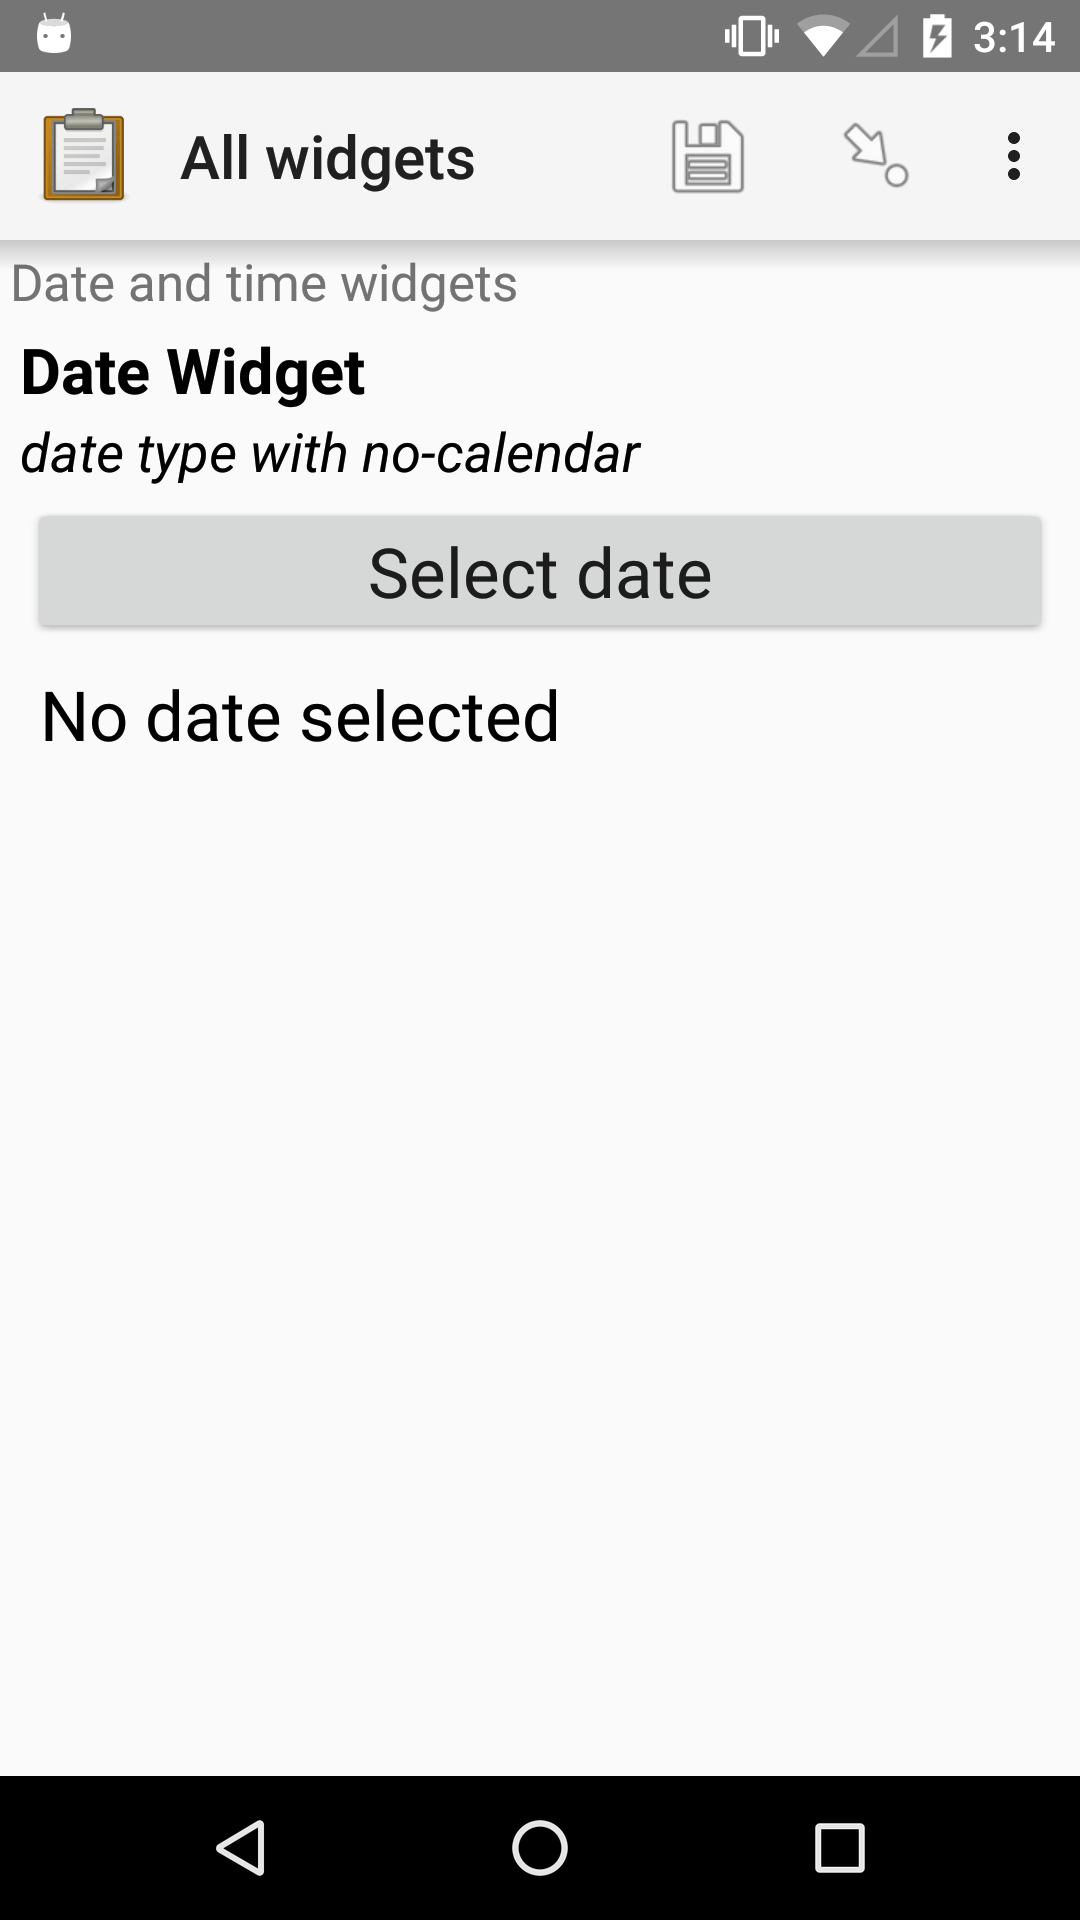 The no-calendar Date form widget, as displayed in the ODK Collect app on an Android phone. The question text is, "Date Widget." The hint text is "date type with no-calendar appearance." Below that is a button labeled "Select date." Below the button is the text, "No date selected." Above the question text is the form group name "Date and time widgets."